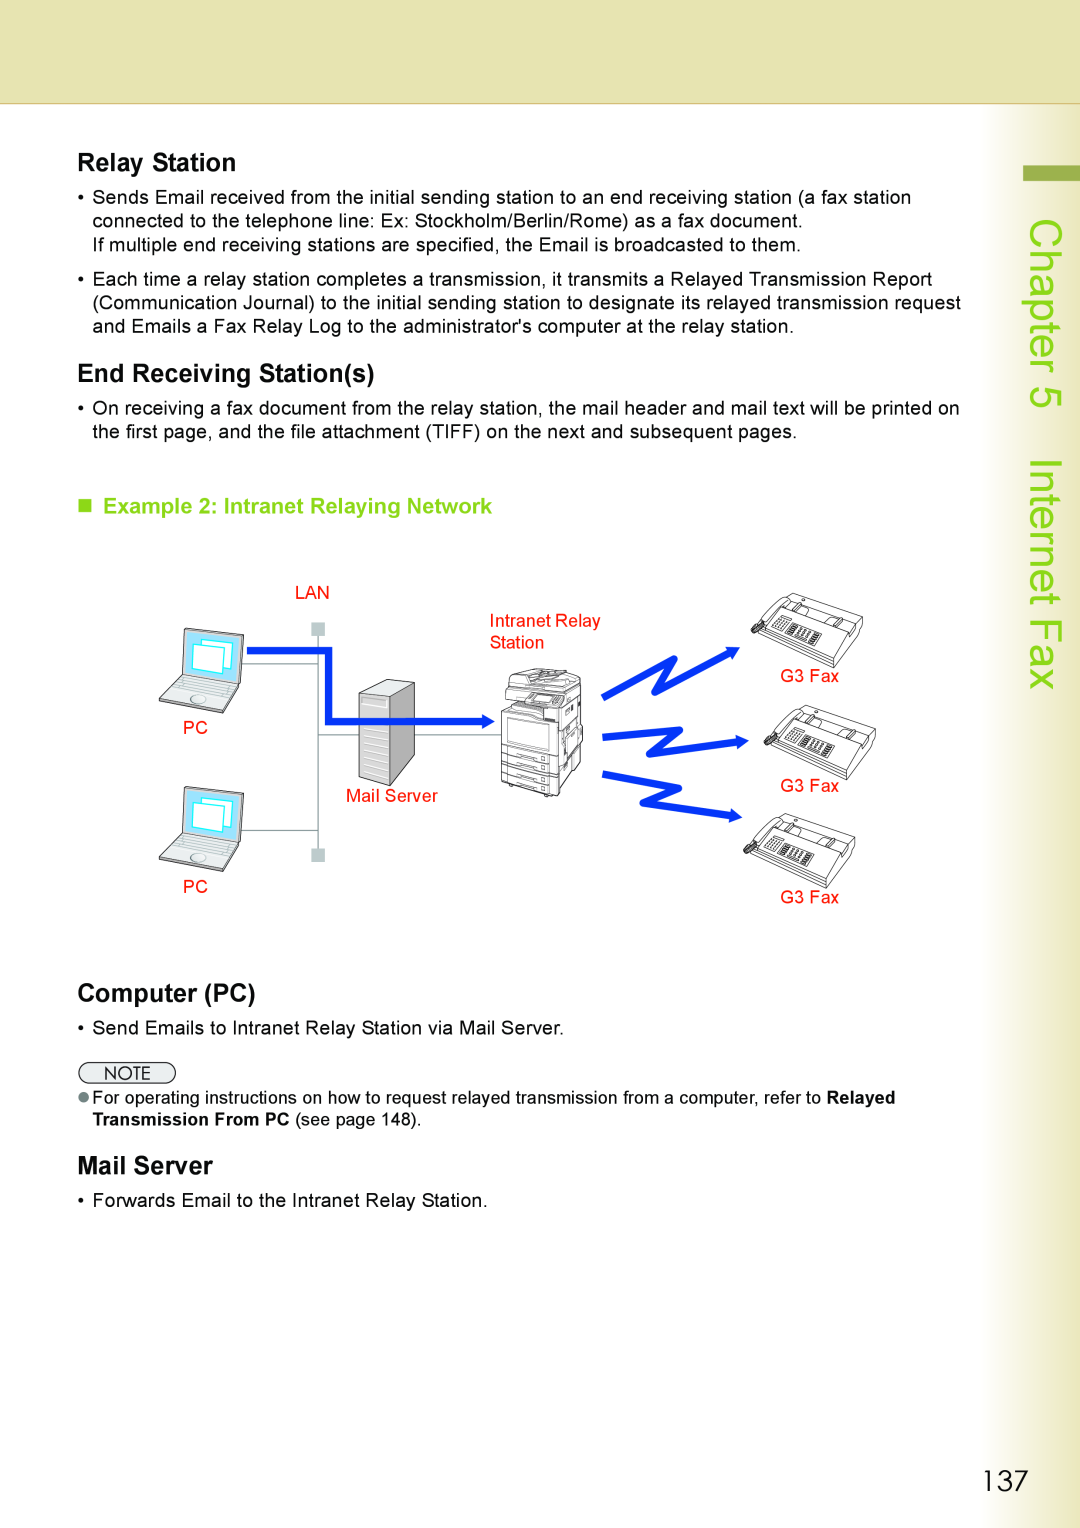 Philips DP-C262 Relay Station, End Receiving Stations, Computer PC, Mail Server, „ Example 2 Intranet Relaying Network 